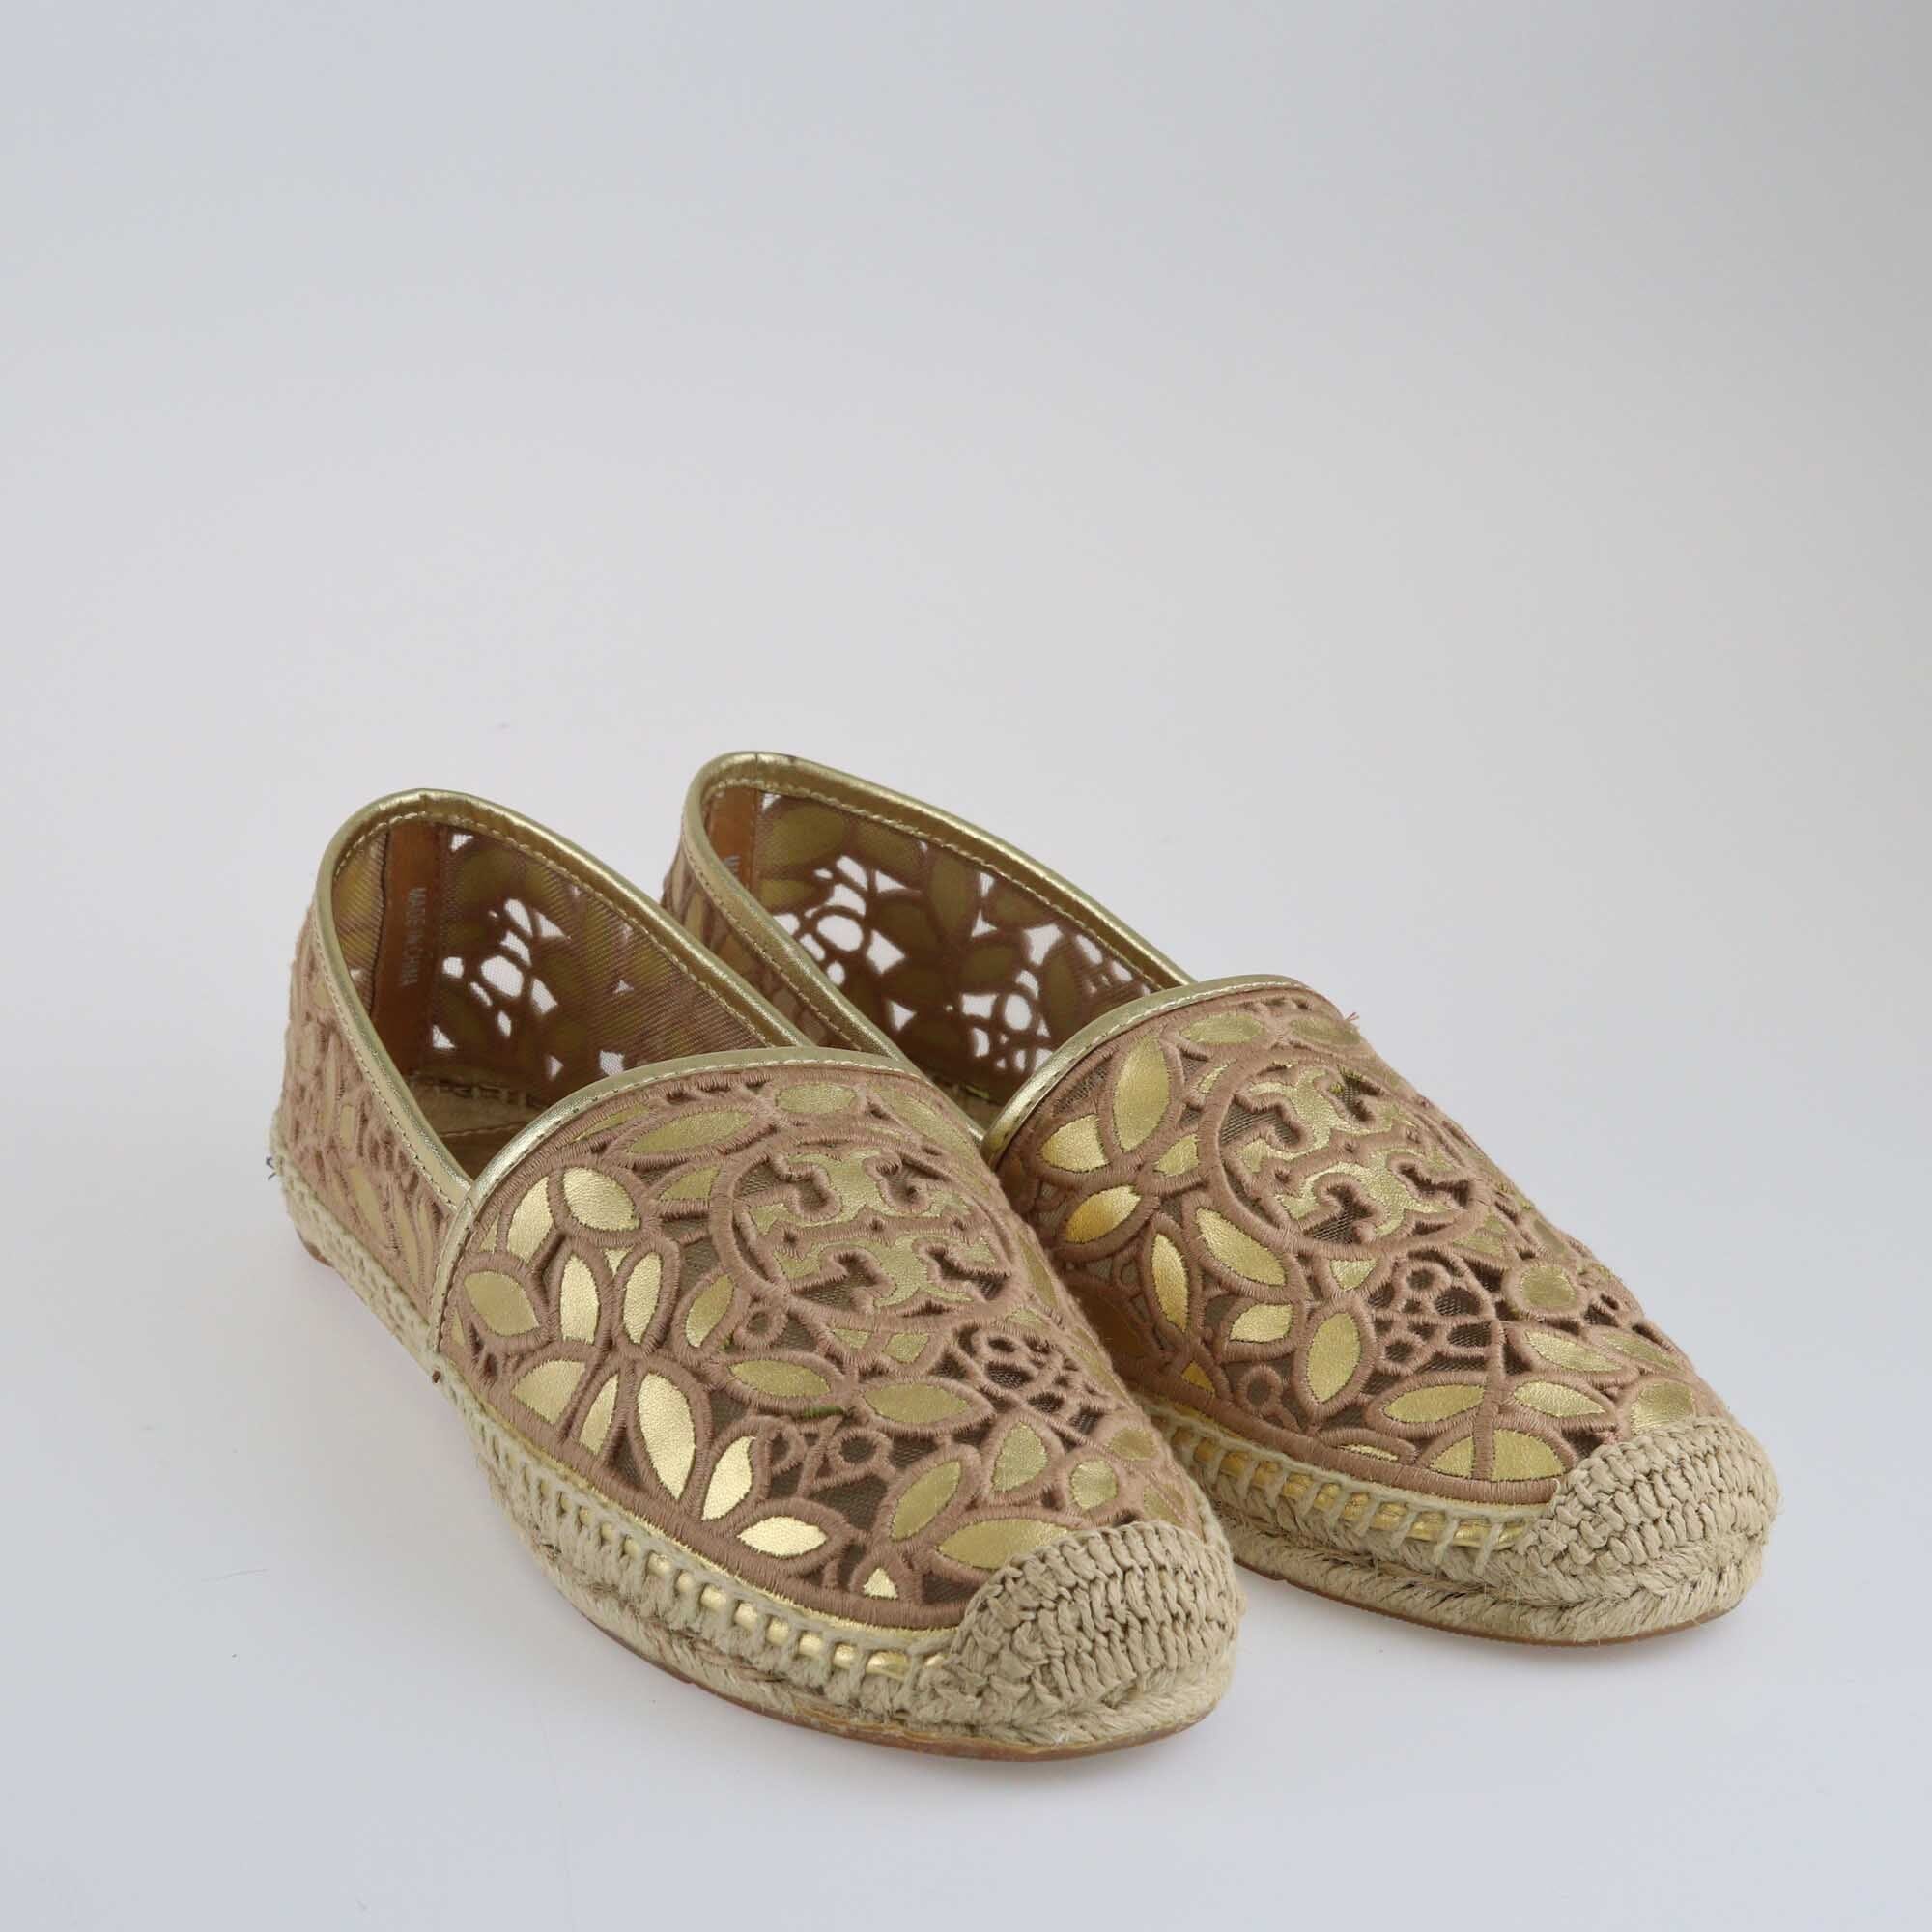 Tory Burch Gold/Natural Leather and Mesh Embroidered Rhea Leaf Espadrille Flats Shoes Tory Burch 